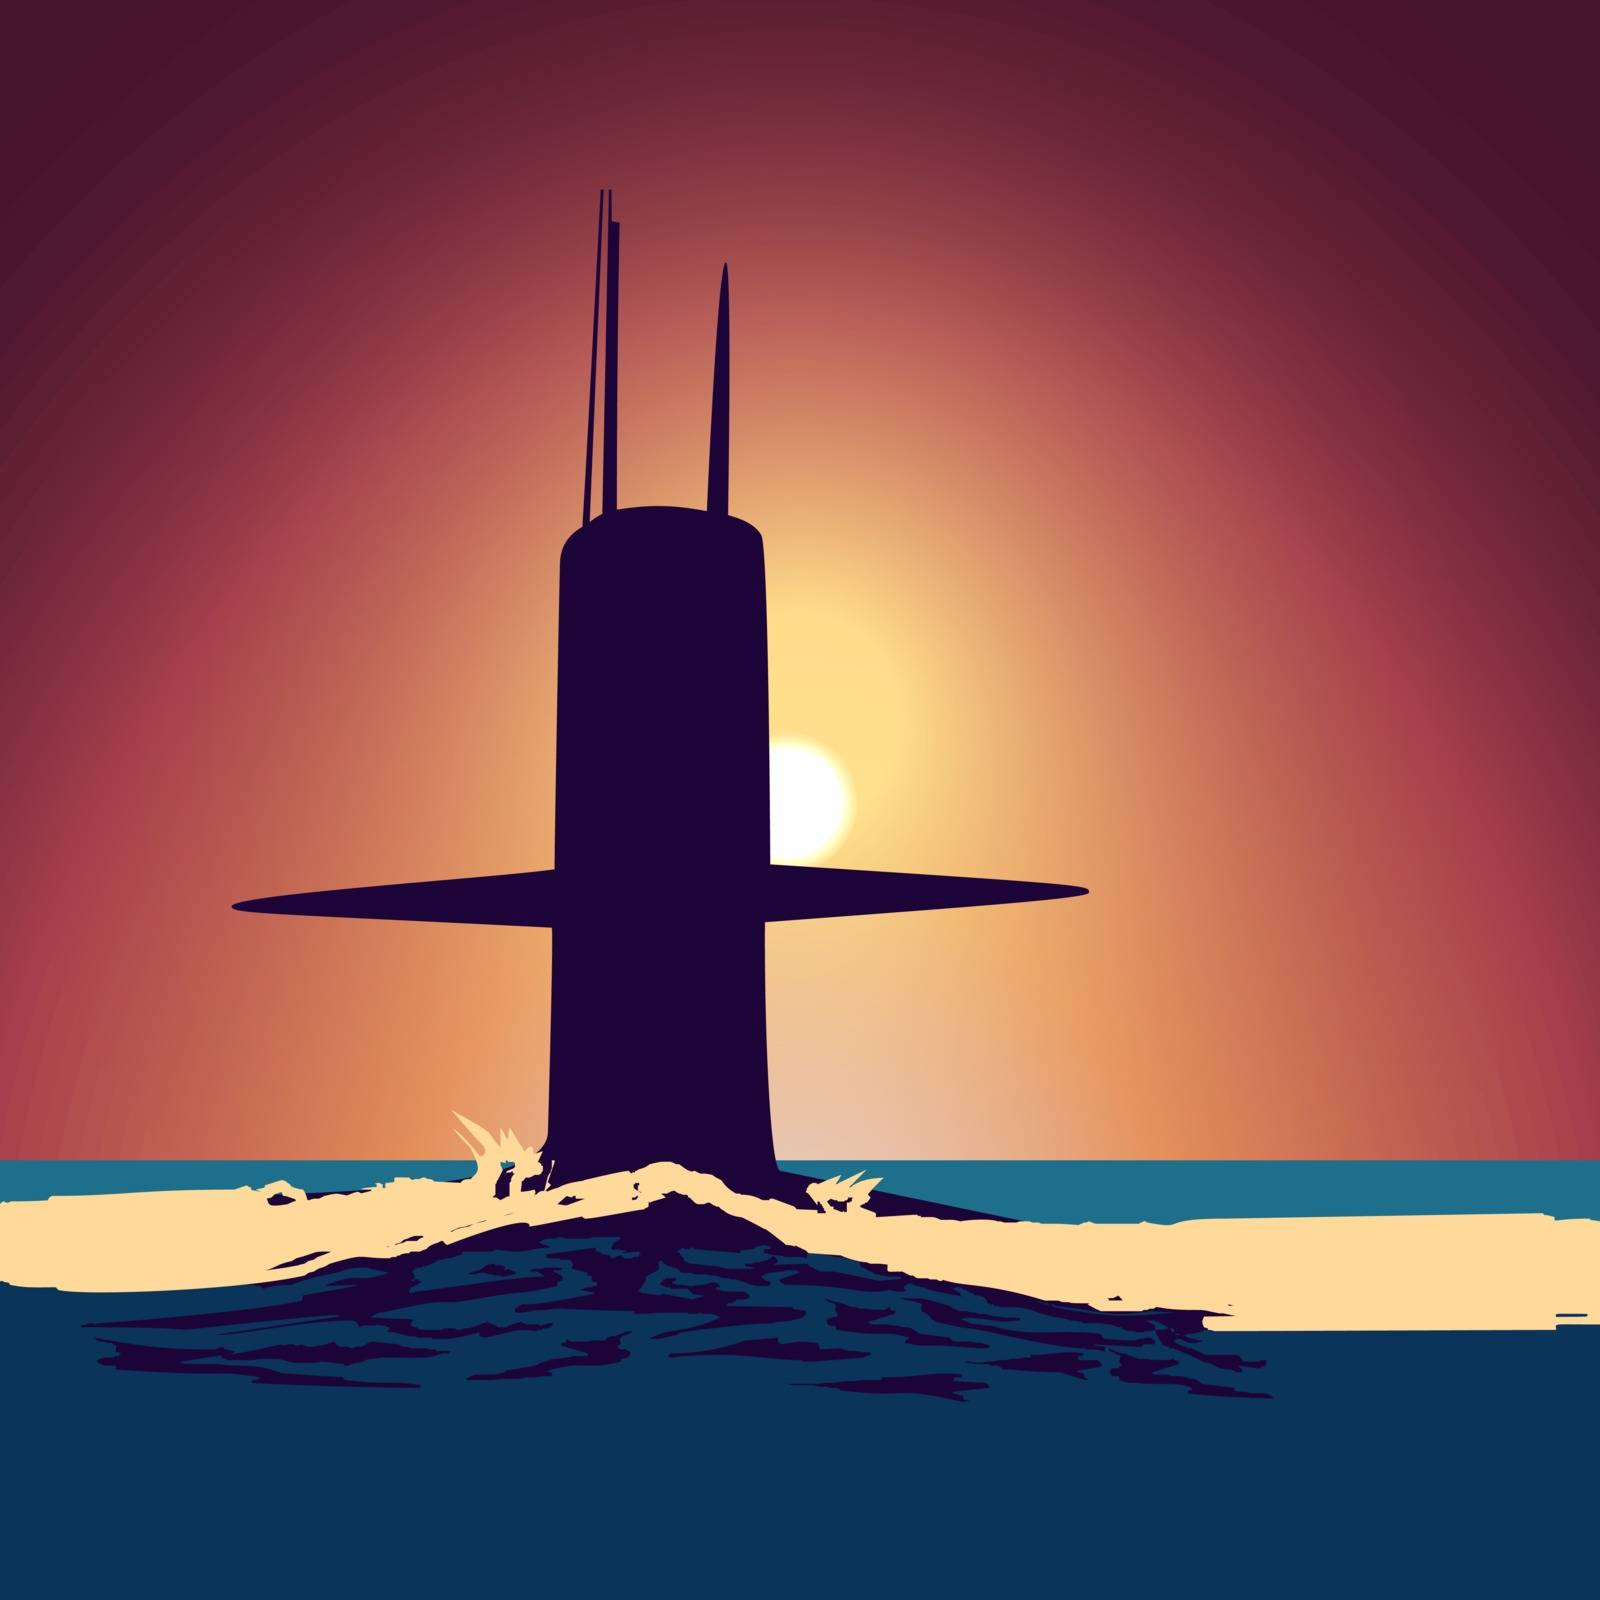 Military submarine silhouette on the background of a sunset